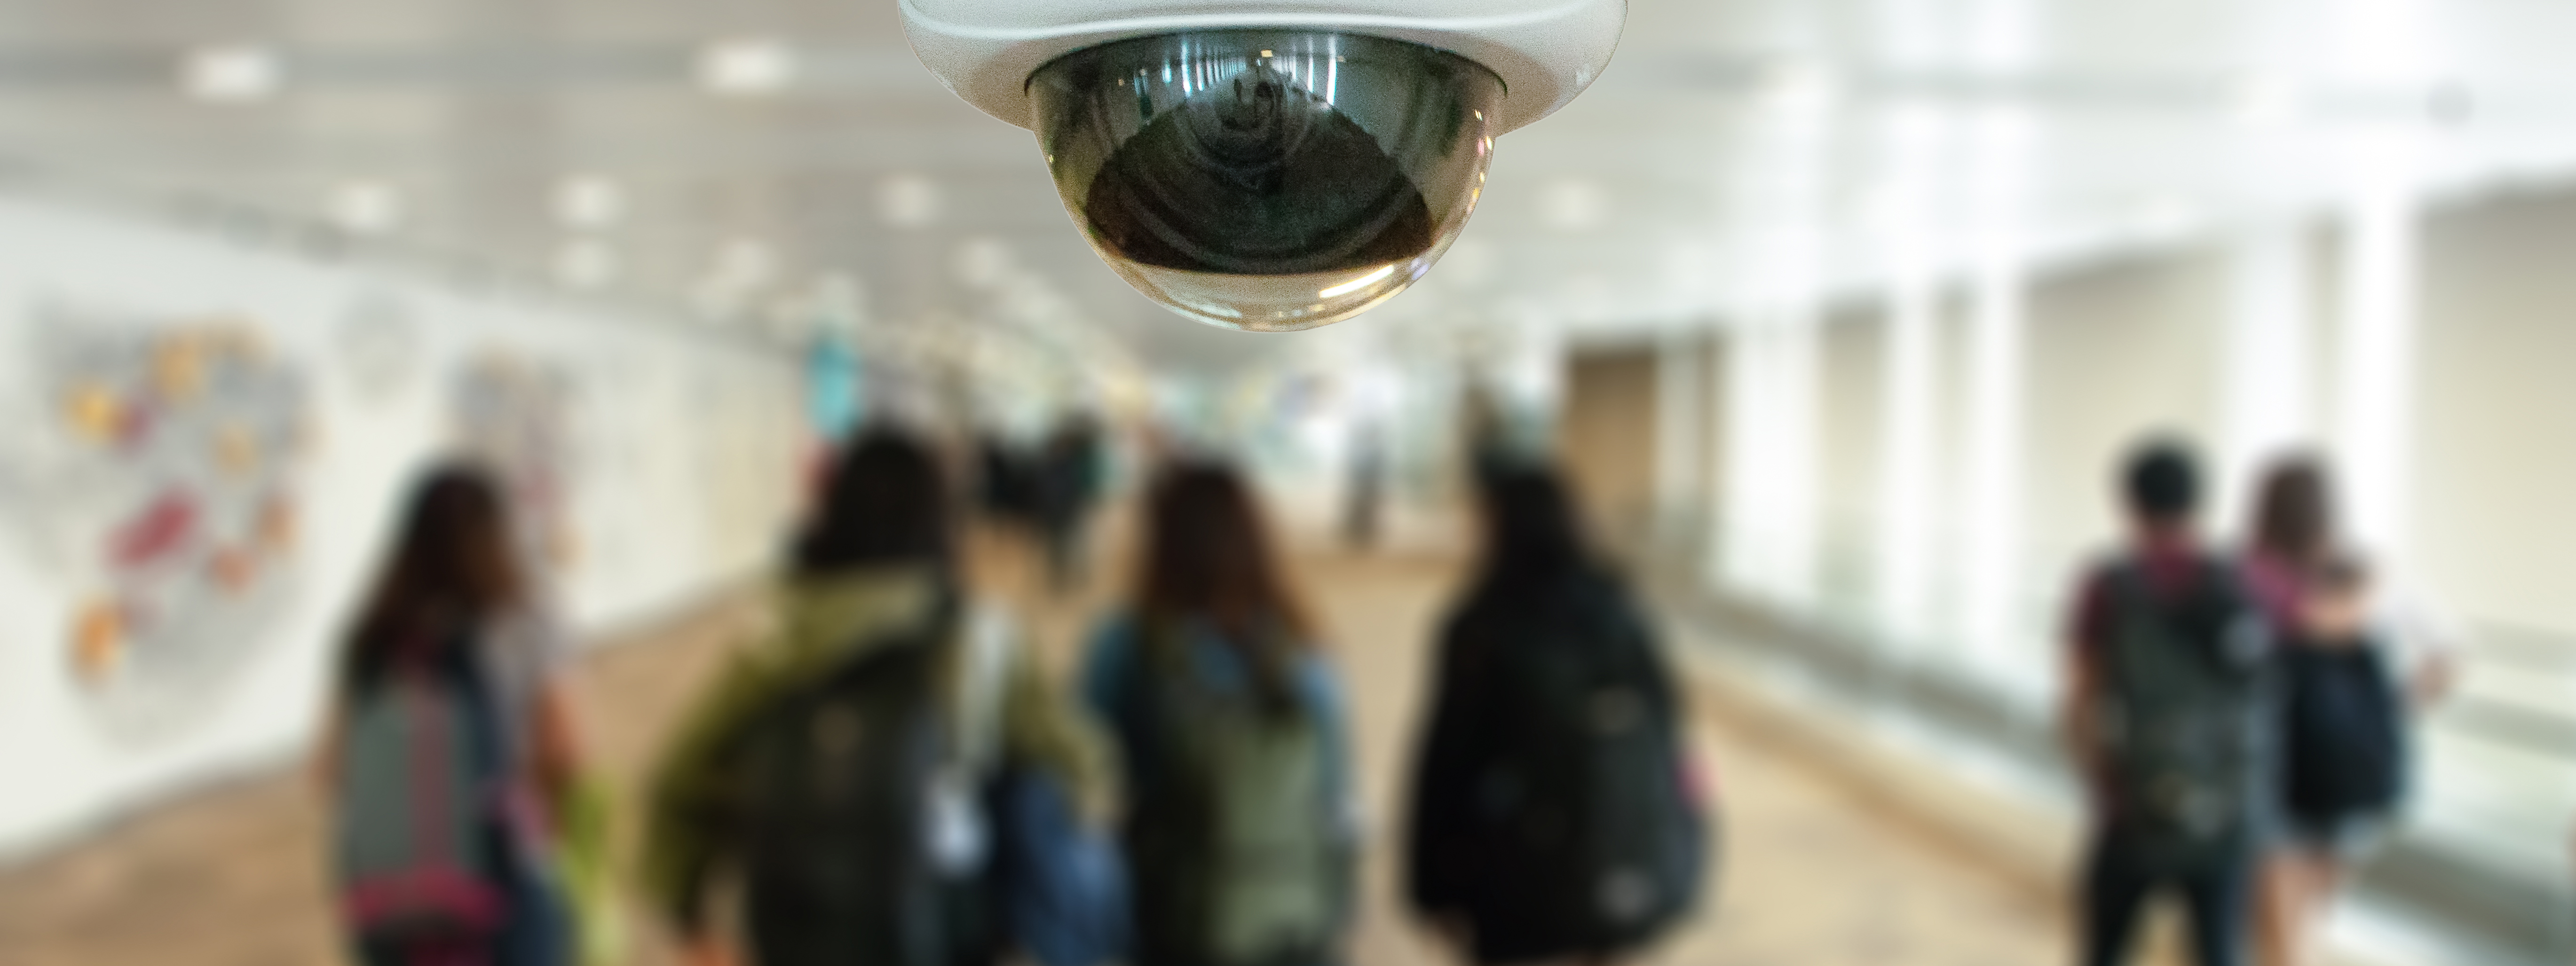 Video Surveillance Guidelines for Physical Security in Schools